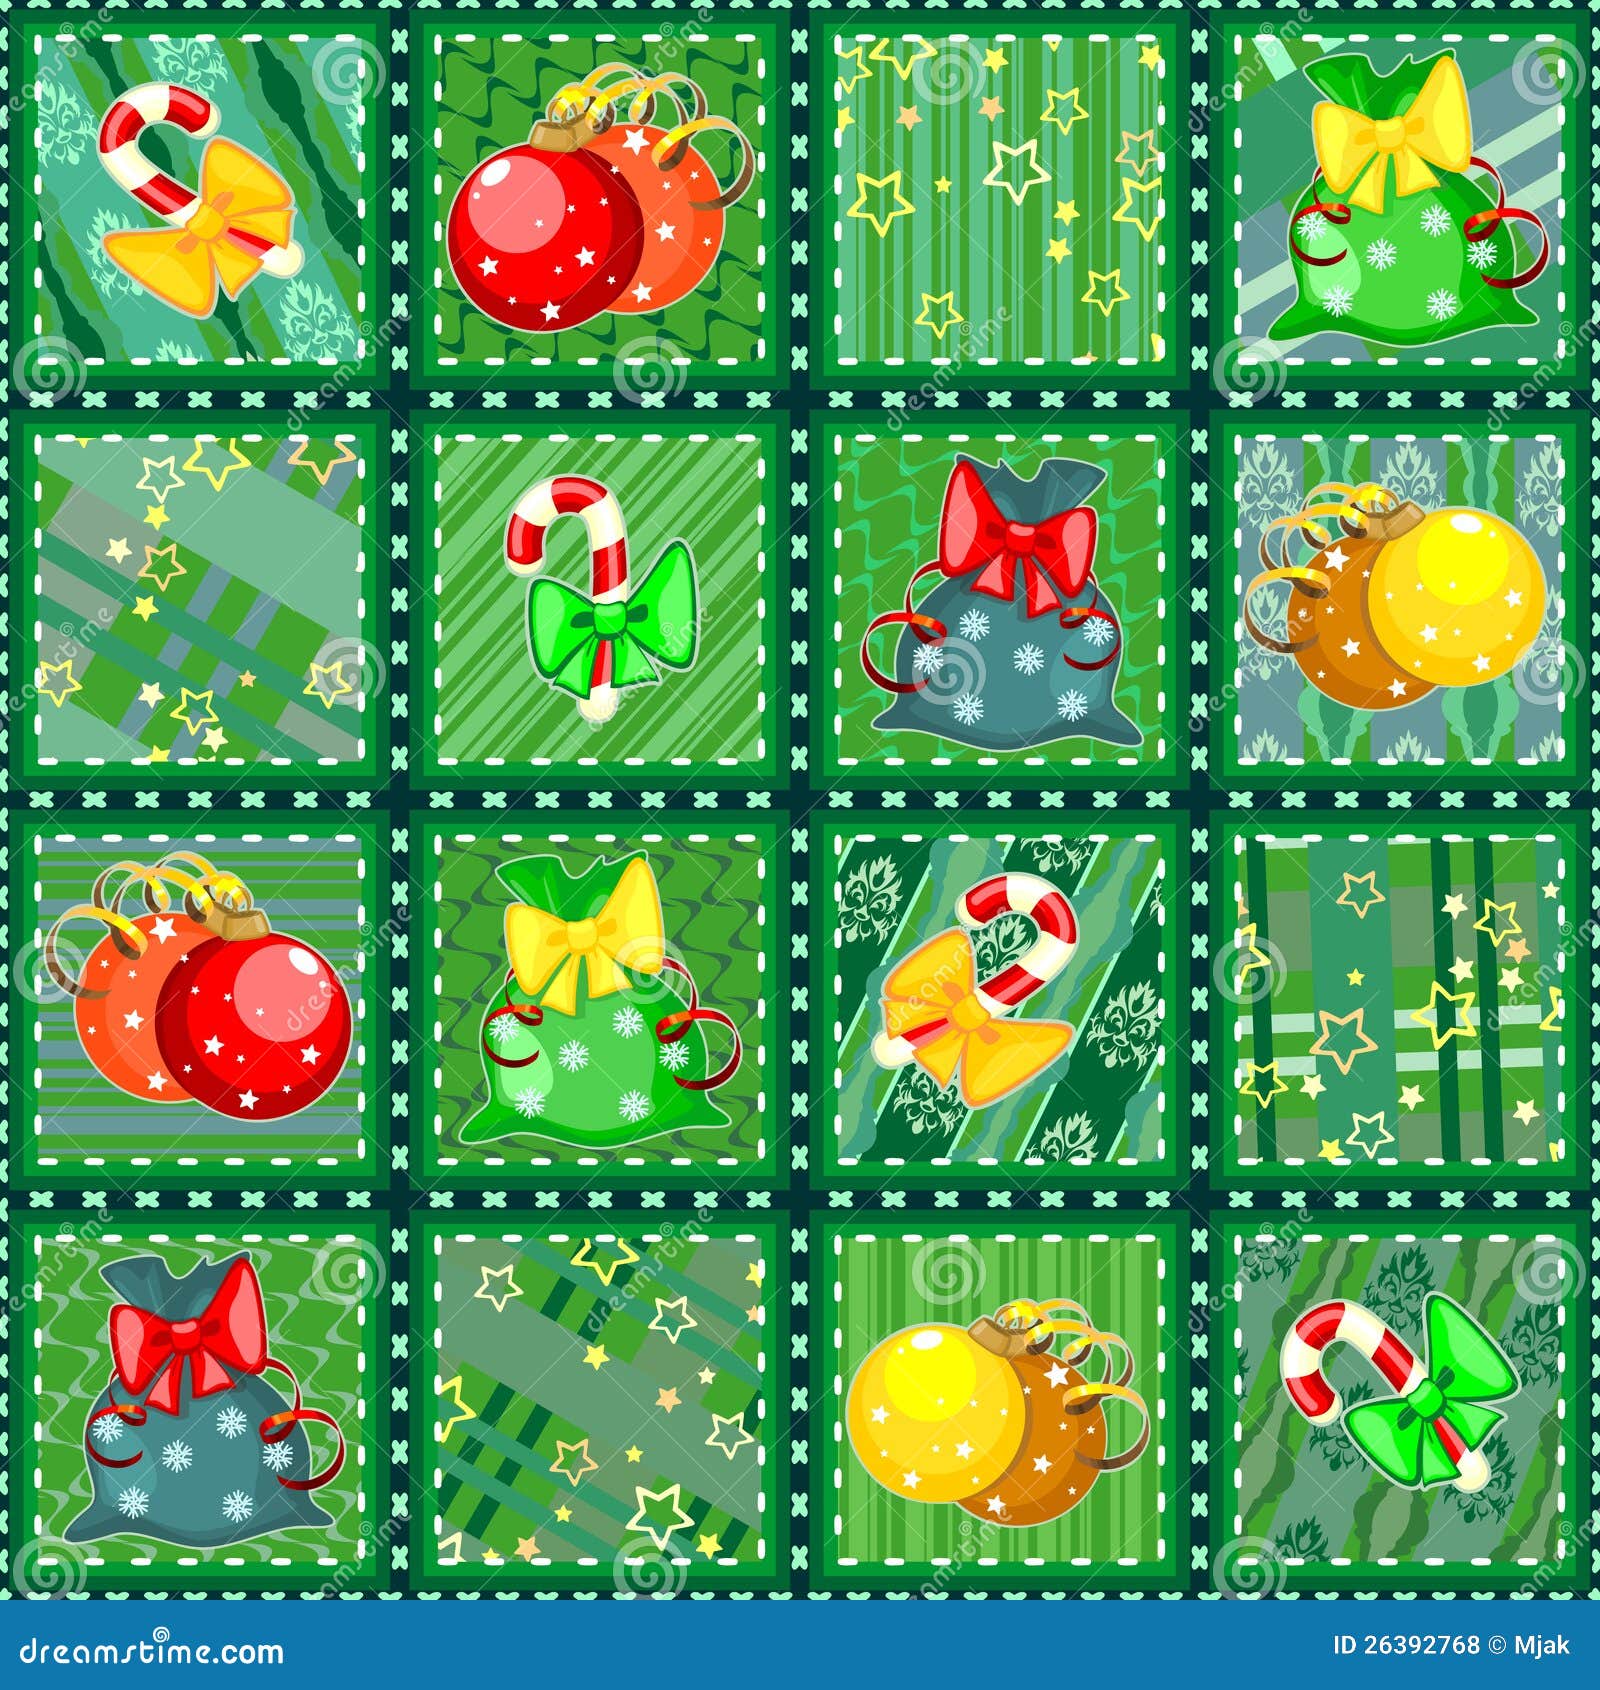 christmas quilt clipart - photo #8